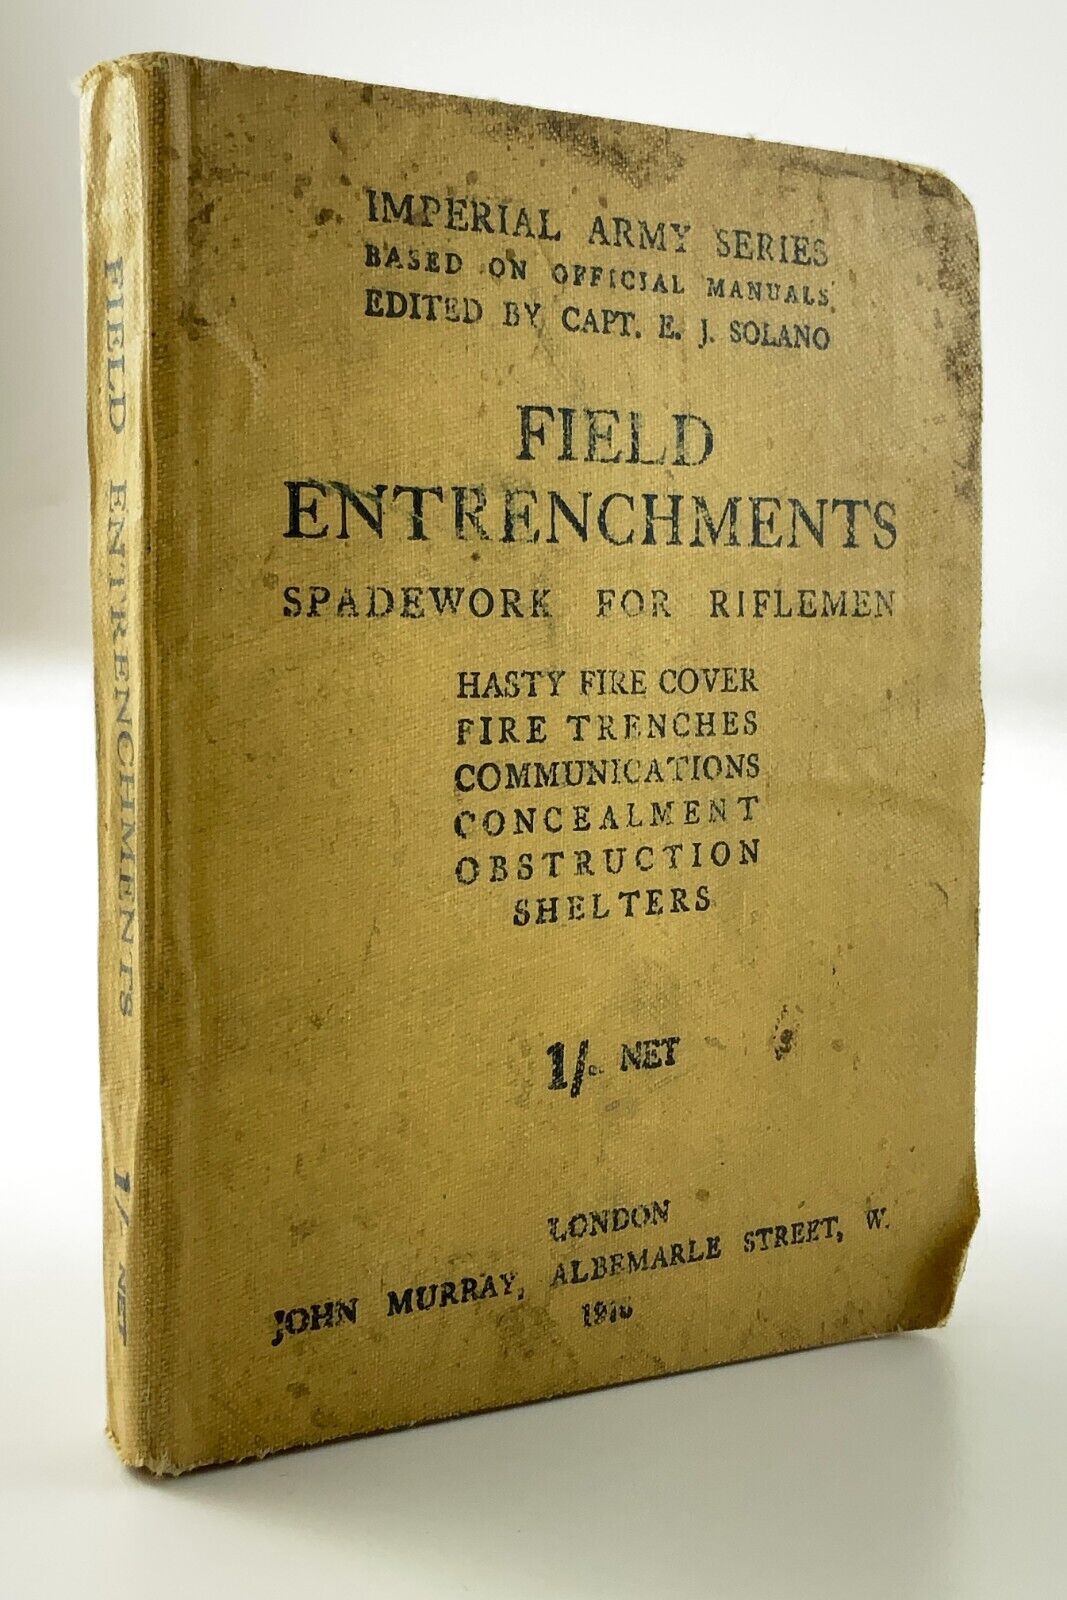 Field Entrenchments Spadework for Riflemen Imperial Army Series 1916 WWI BB975